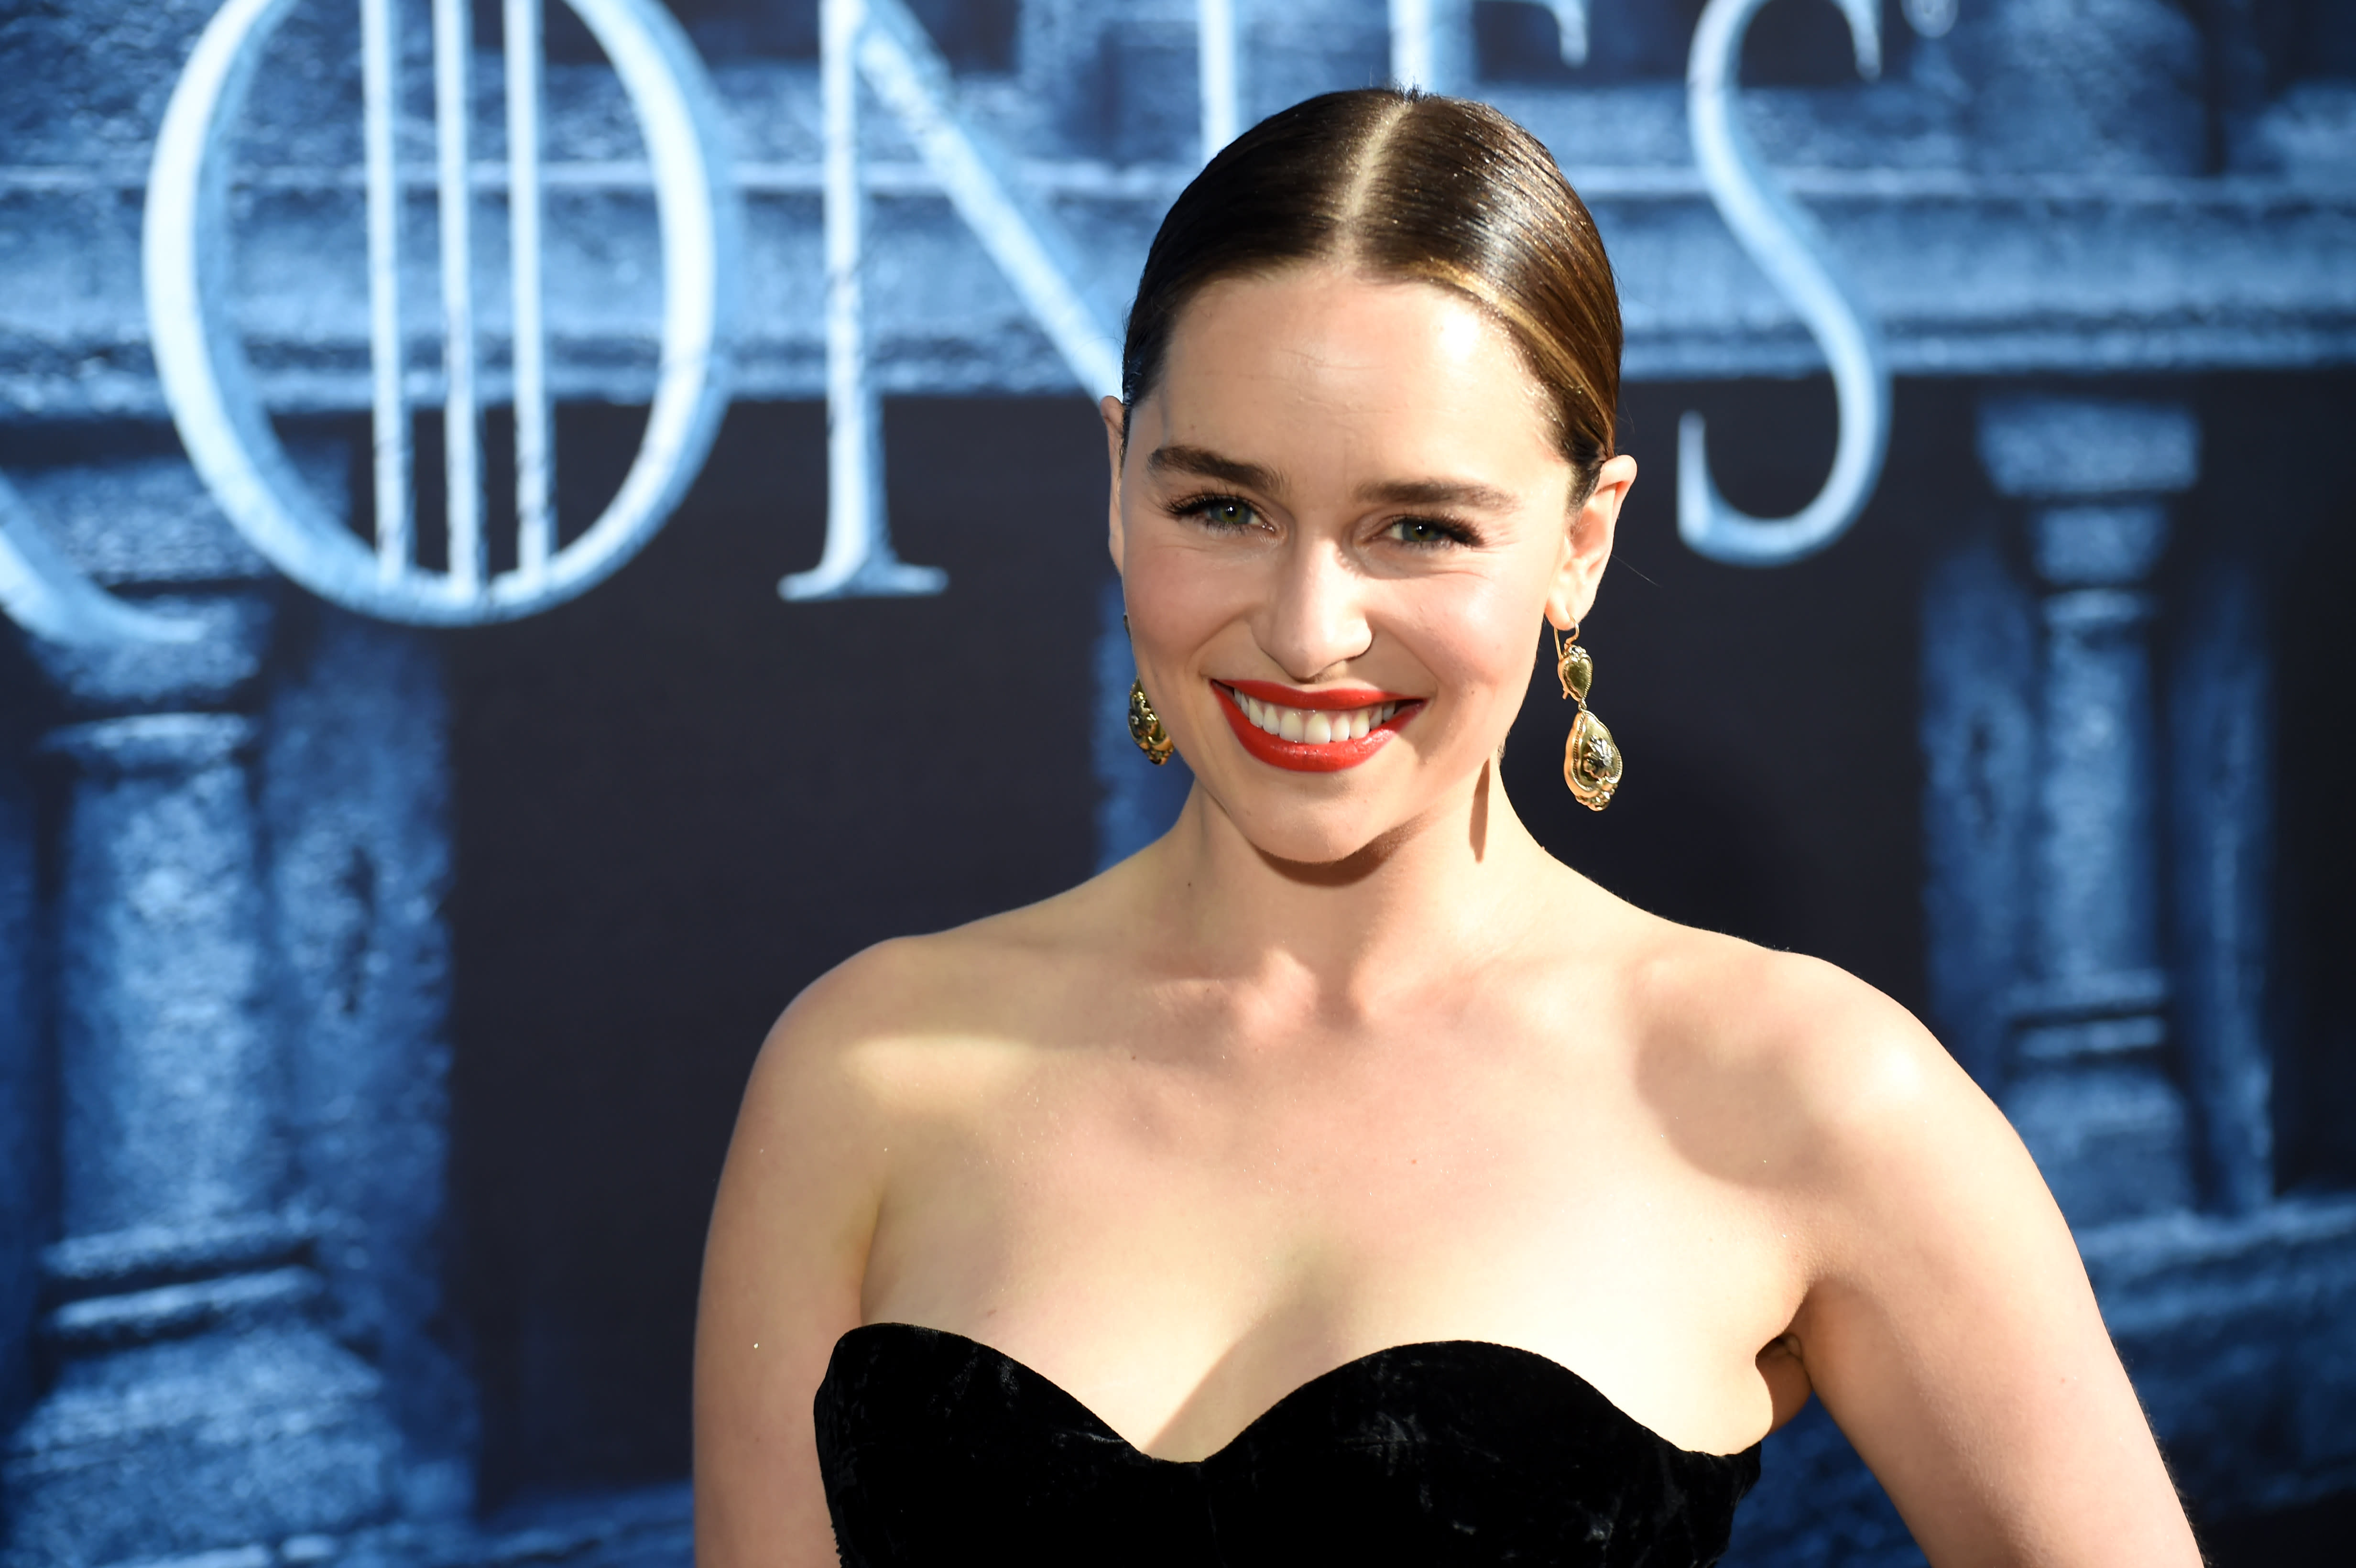 Emilia Clarke wore a sheer sweater with a lacy bra, and now we want to